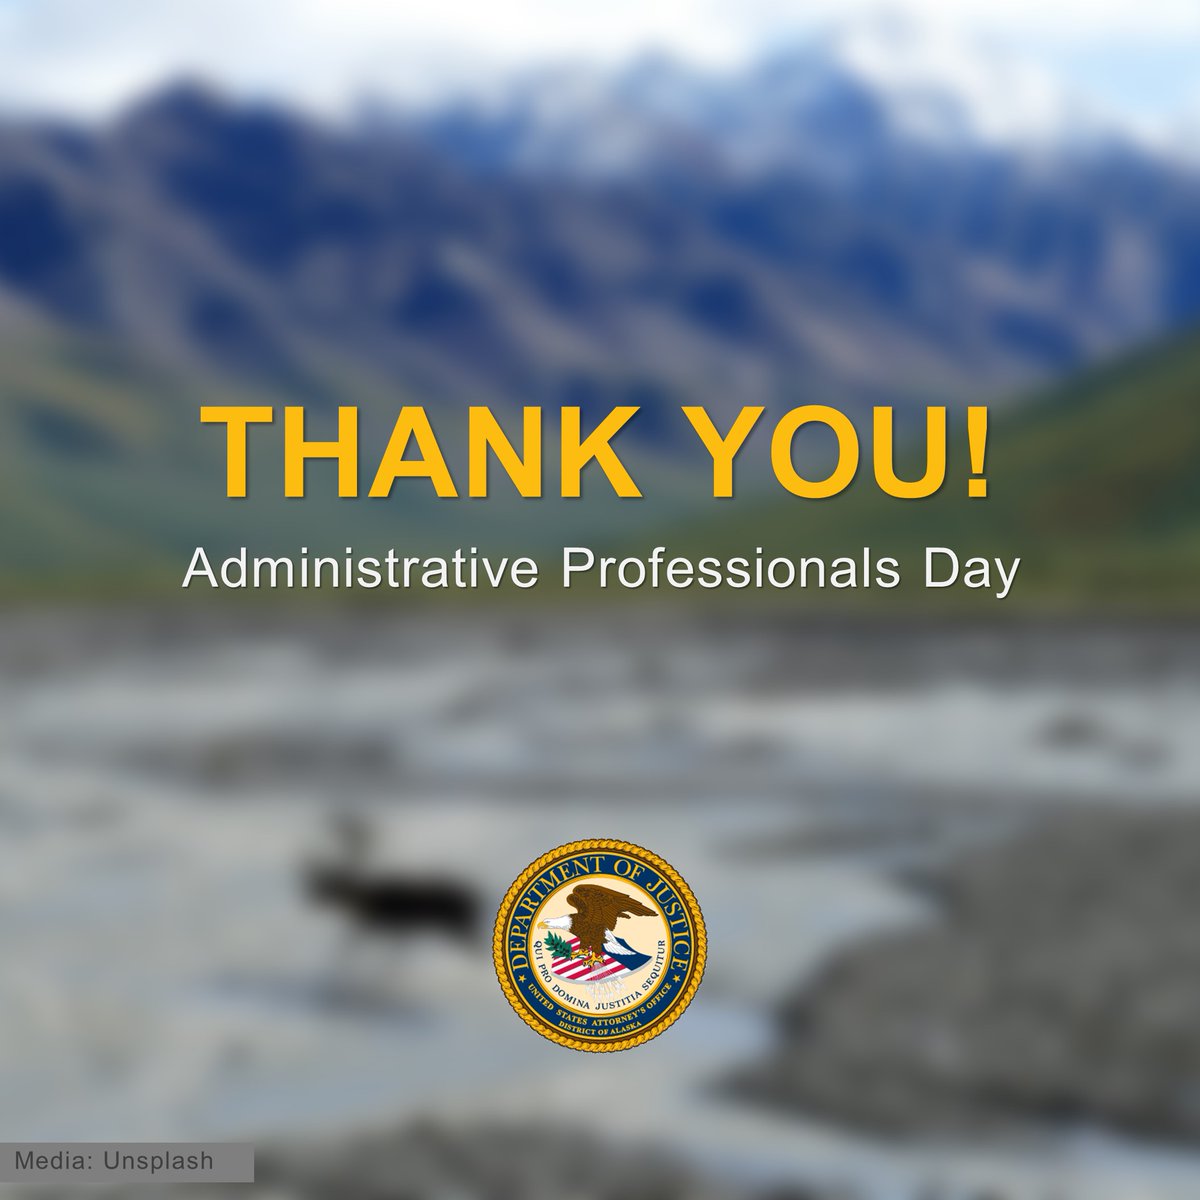 Today is #AdministrativeProfessionalsDay! We wanted to take a moment to recognize our dedicated administrative & support teammates who keep our office moving day in & day out! Thank you for your unwavering commitment to the people of #Alaska. We couldn't do justice without you.